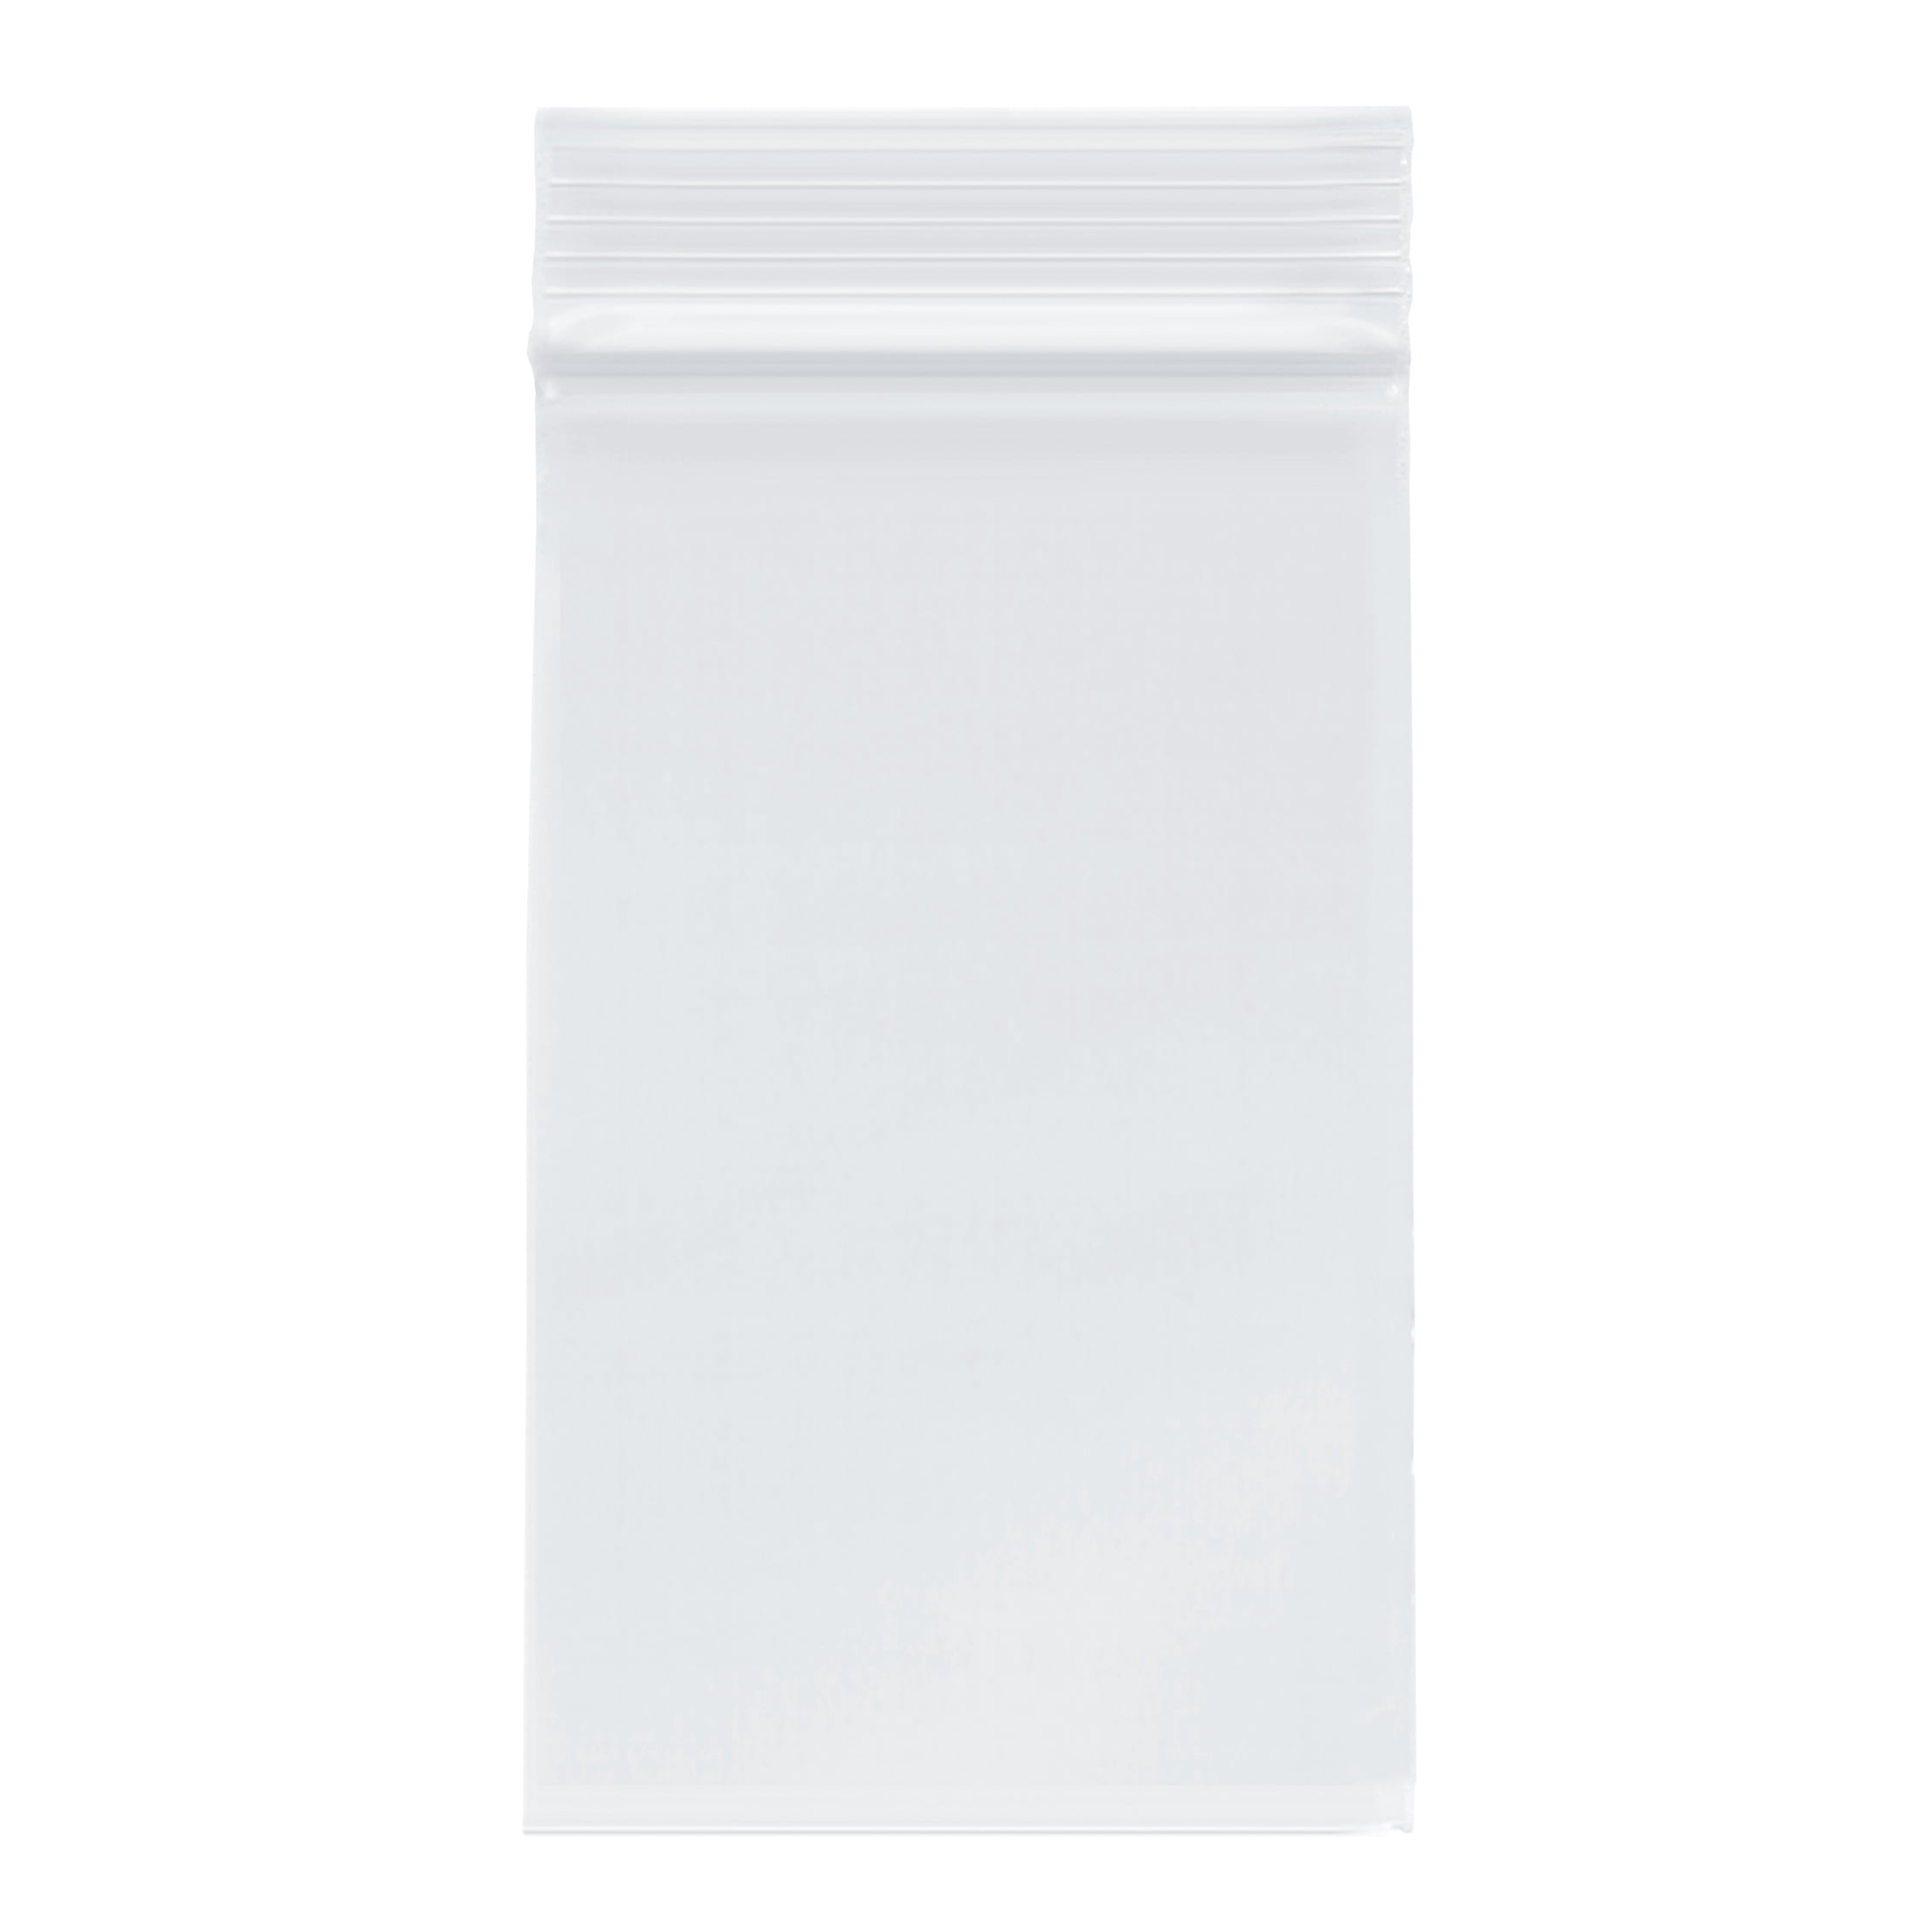 2 Mil Zip Top Polybag 1000 Pcs Clear Reclosable Bags with White Block 5" x 8" 